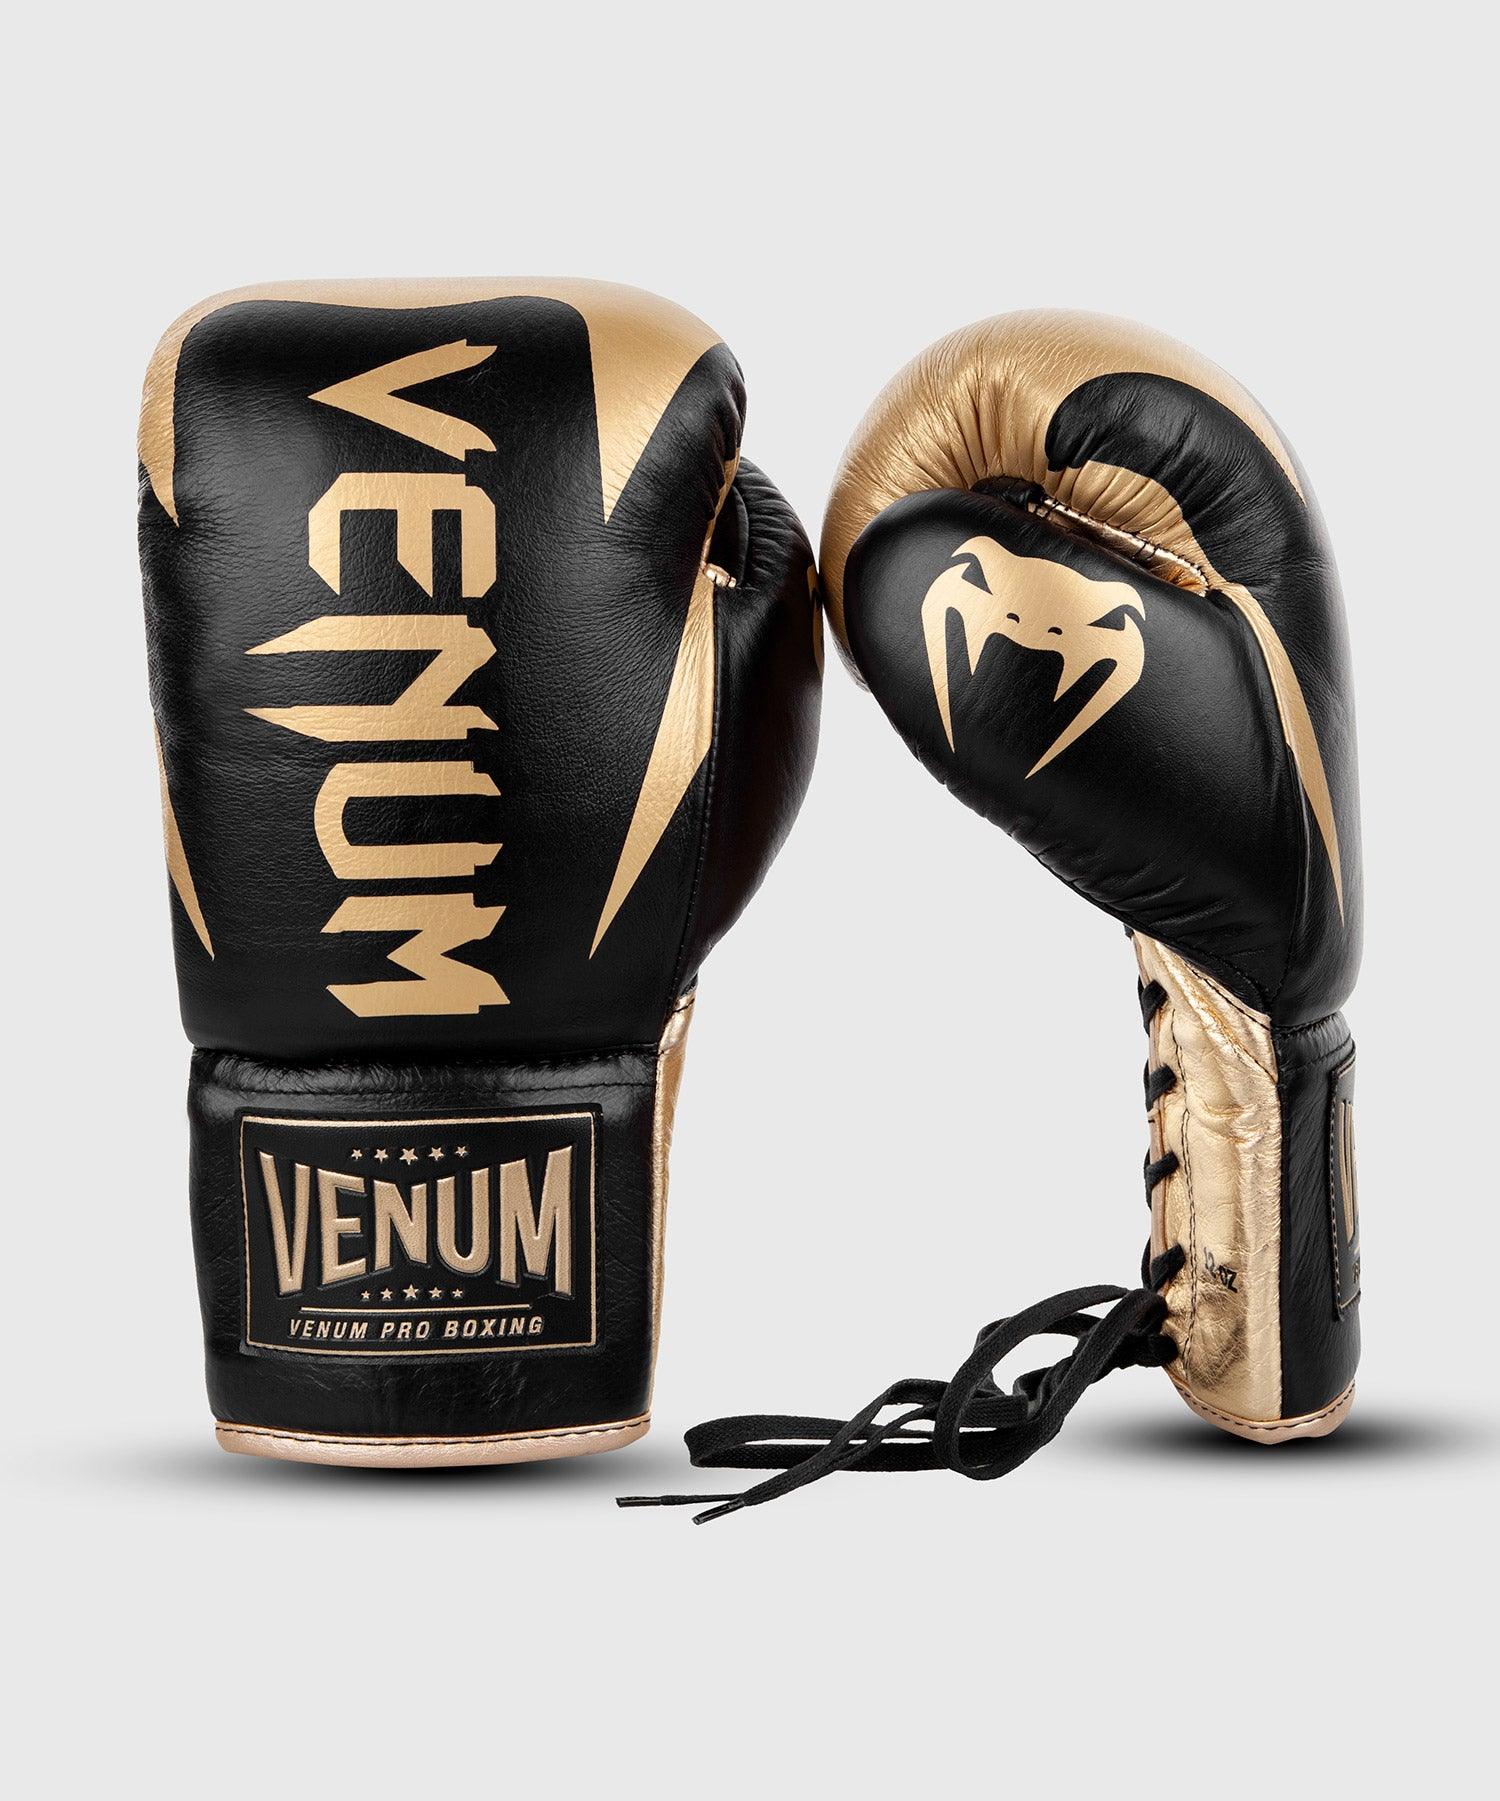 Venum Hammer Pro Boxing Gloves - With Laces - Black/Gold Picture 2